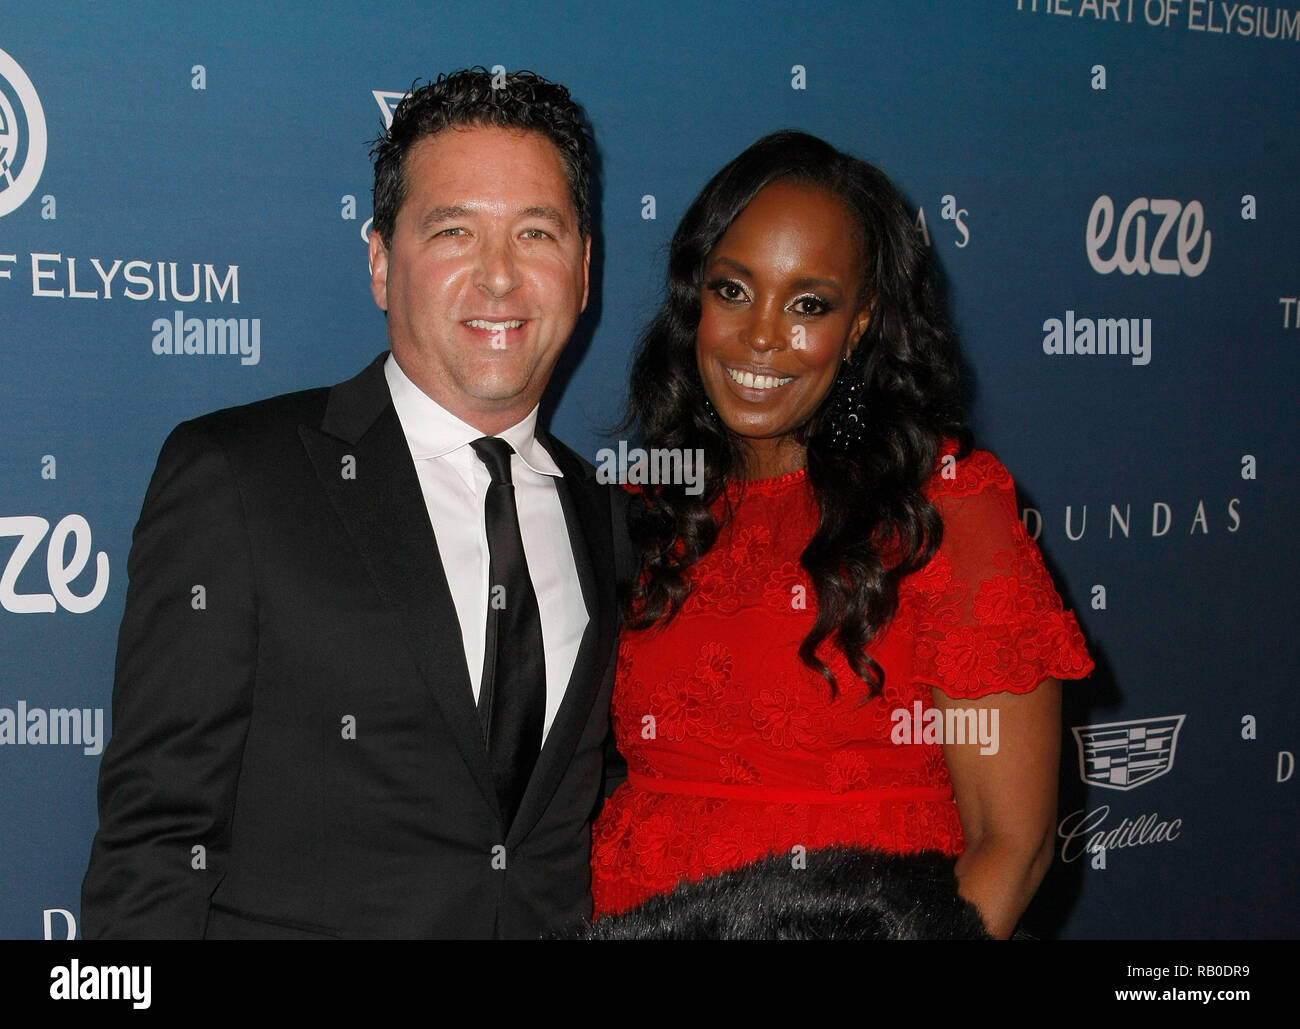 California, USA. 5th Jan 2019. Nyakio Kamoche Grieco, David Grieco attends HEAVEN, presented by The Art of Elysium, on January 5, 2019 in Los Angeles, California. Photo: imageSPACE/MediaPunch Credit: MediaPunch Inc/Alamy Live News Stock Photo